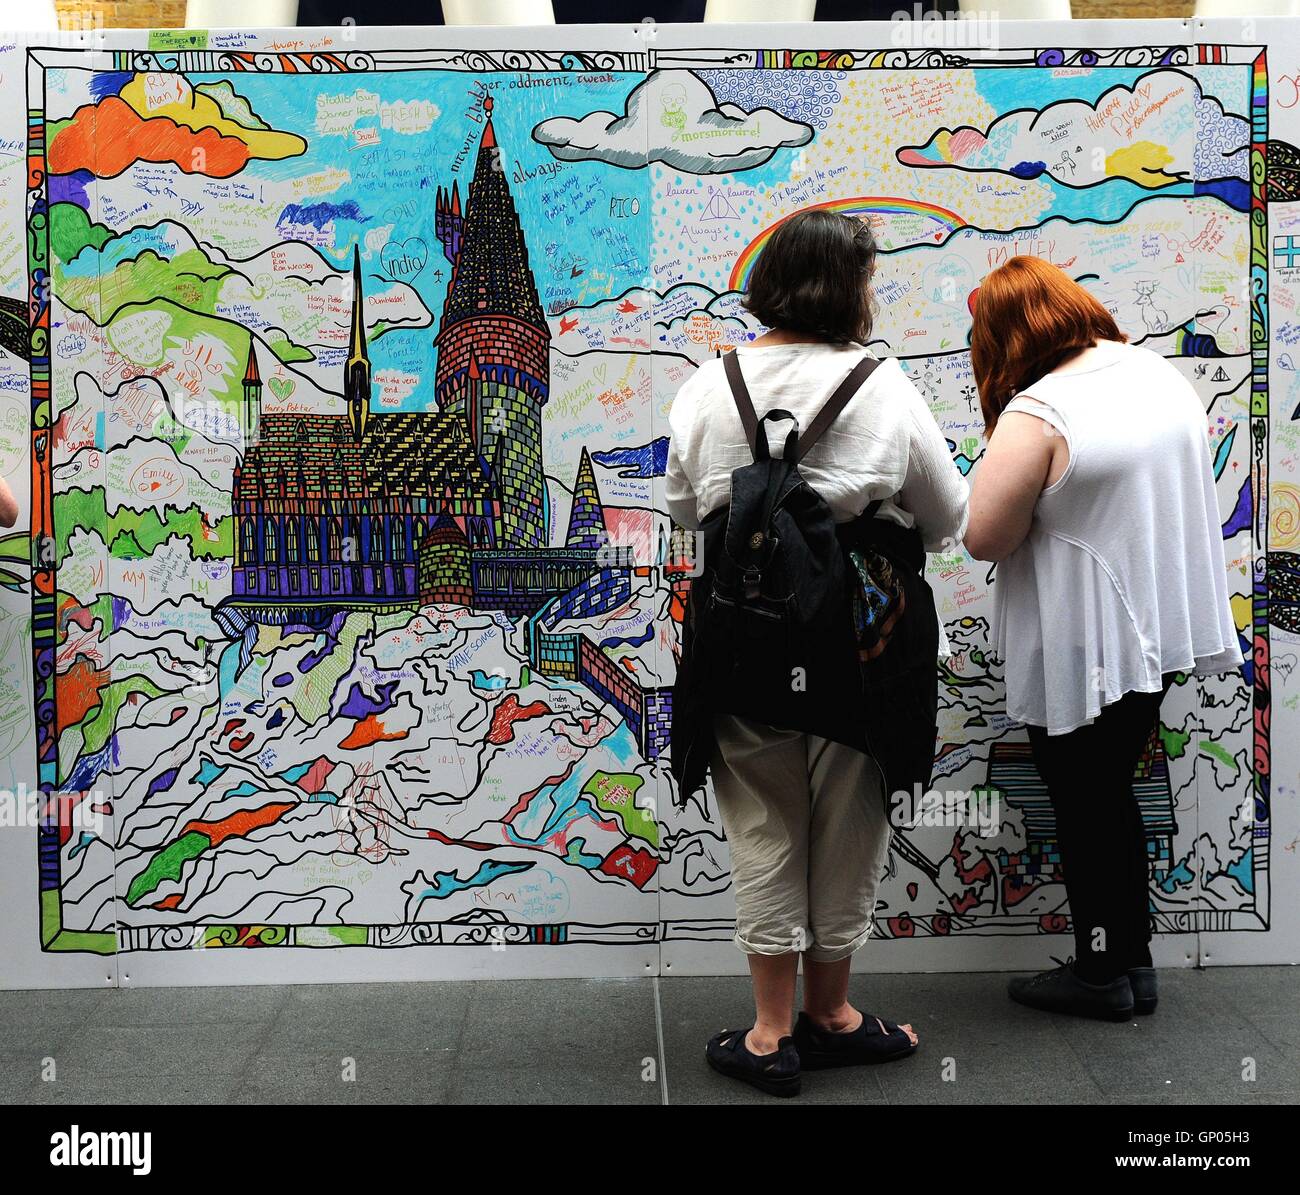 Members of the public and fans of the Harry Potter series fill in Potter-themed colouring boards at Kings Cross station in London. September 1st marks the day when students board the Hogwarts Express at Platform 9 3/4 at King's Cross to return to the fictional Hogwarts school for the new academic year. Stock Photo